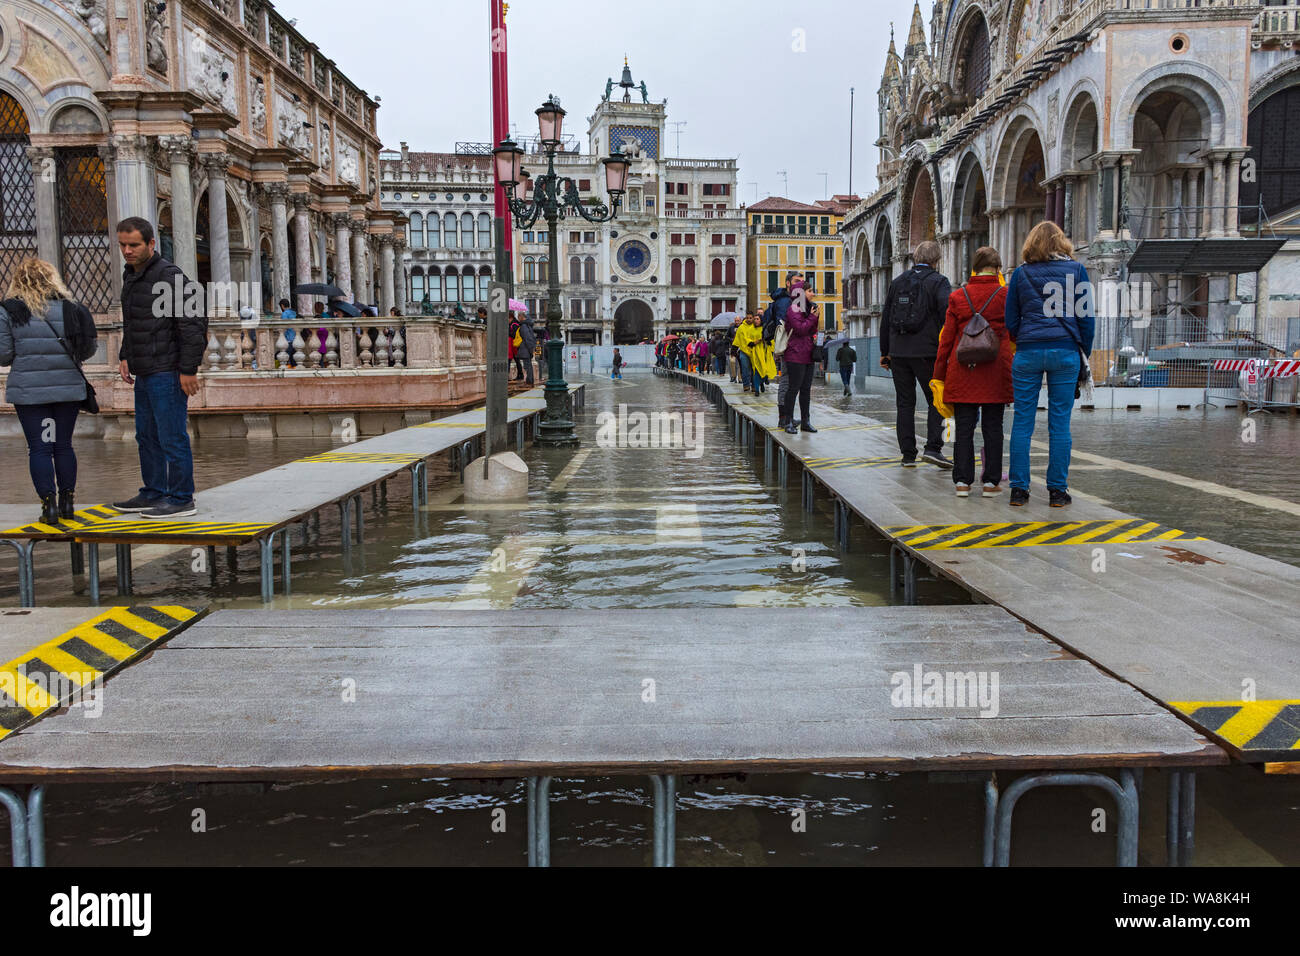 People walking on elevated platforms during an Acqua alta (high water) event, Piazzetta di San Marco, Venice, Italy Stock Photo